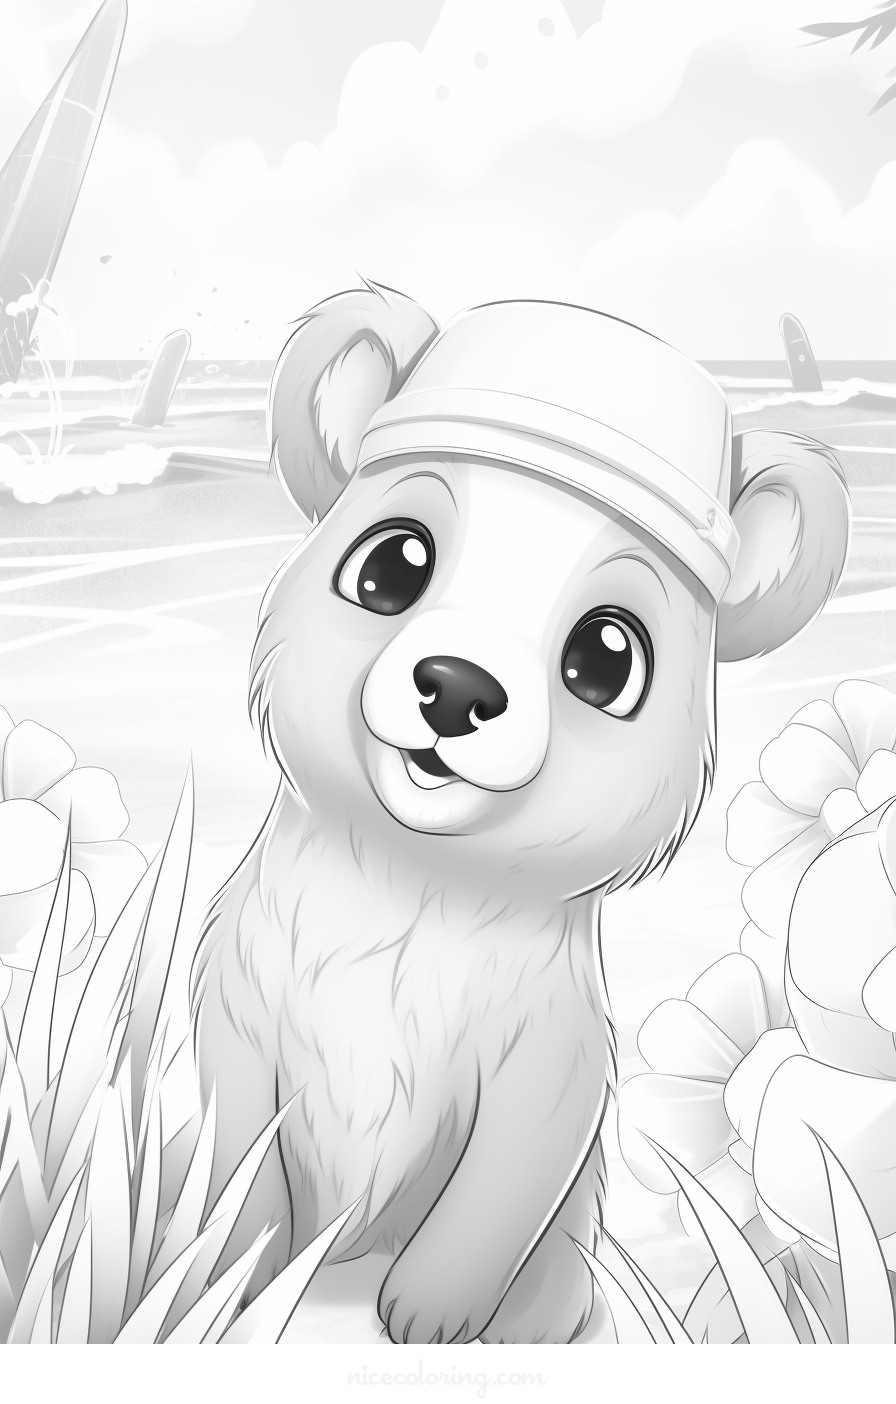 Bear cub sitting in a forest scene coloring page